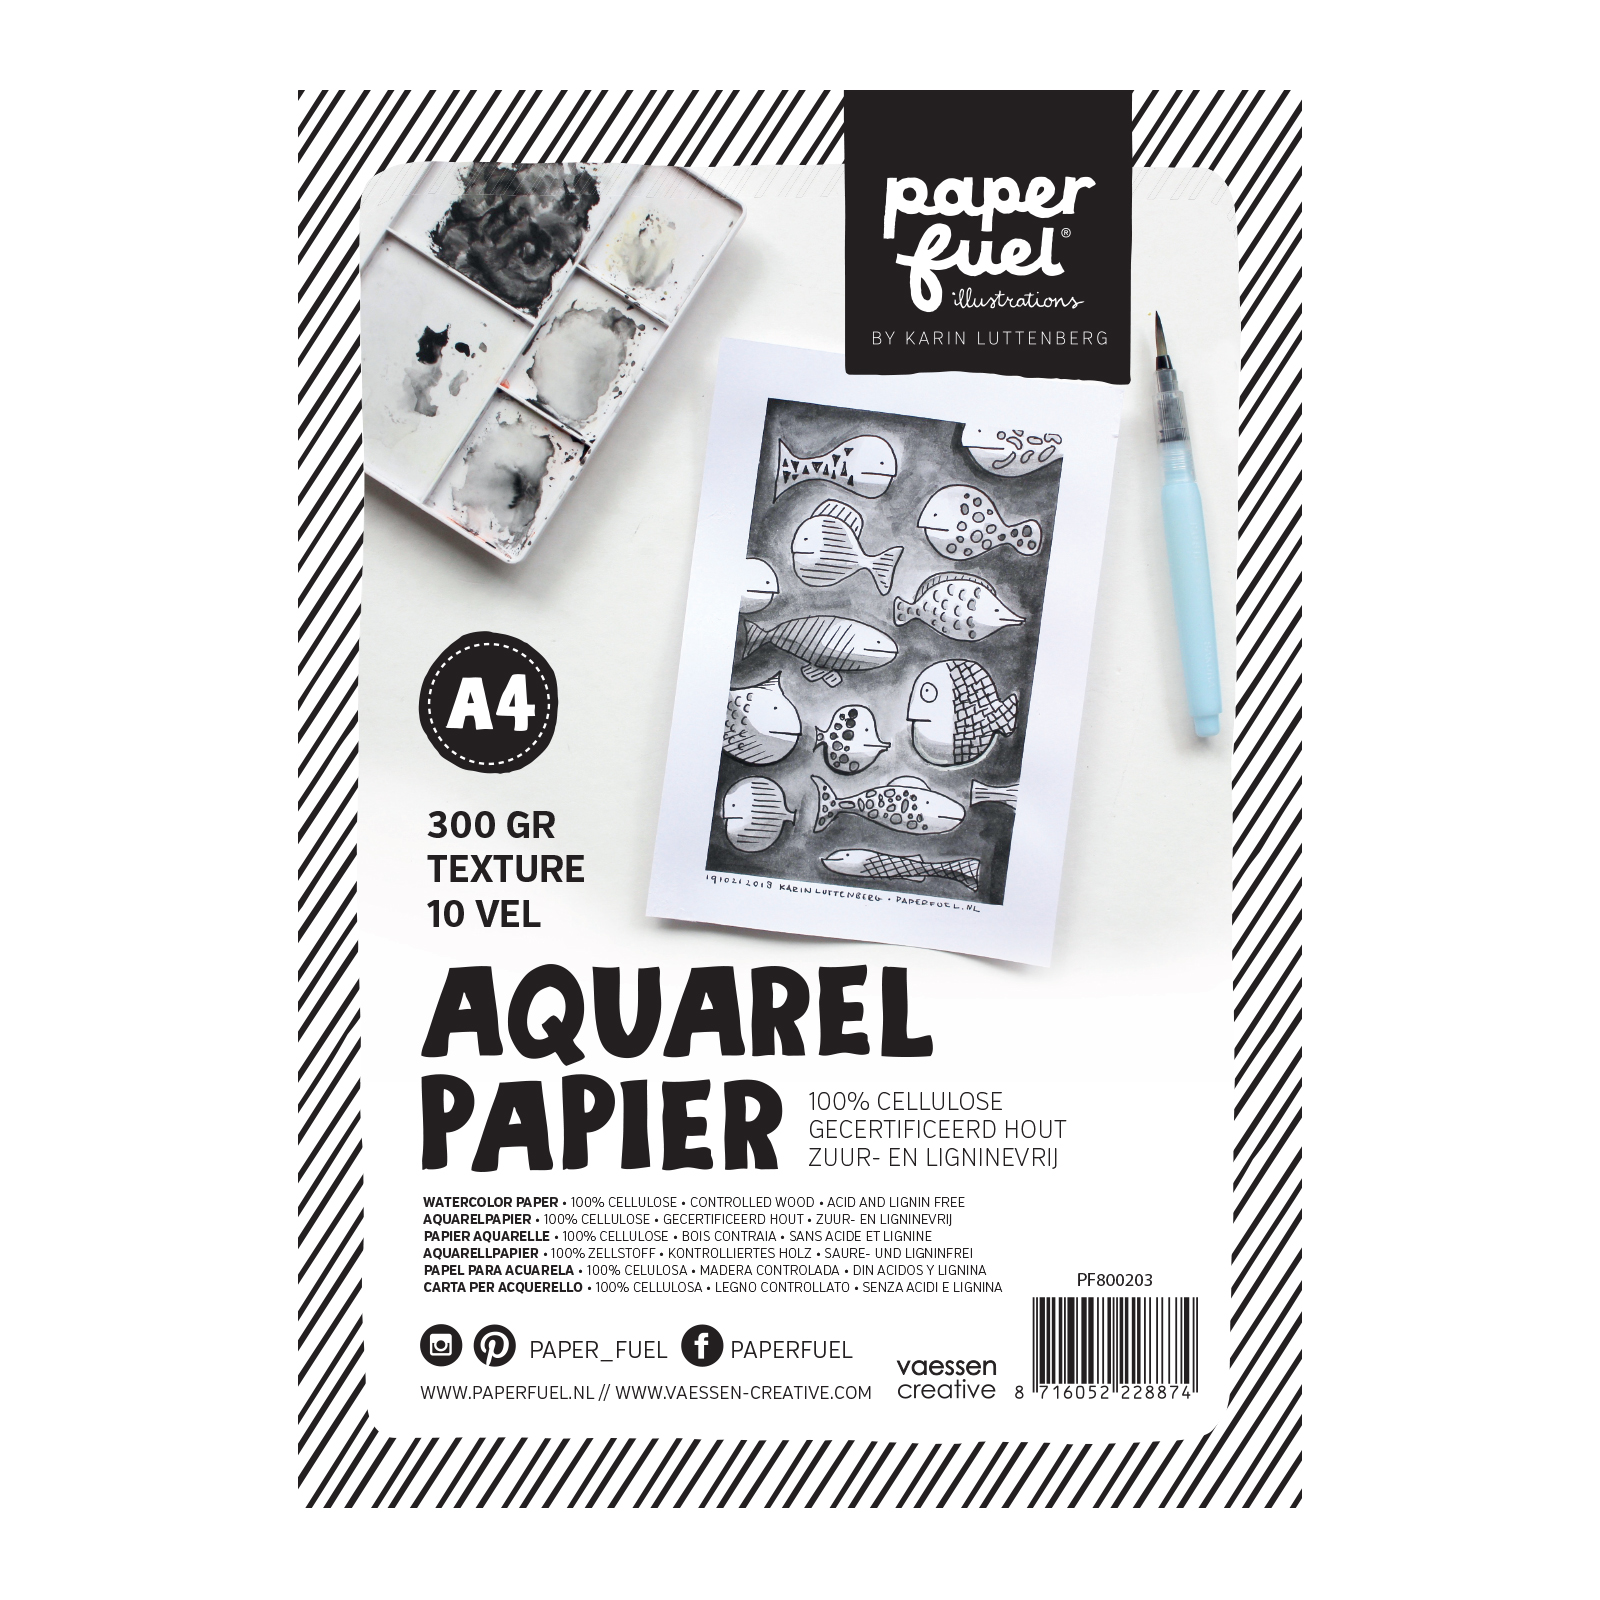 Paperfuel • Watercolour Paper 300g Textured A4 Off-white 10 sheets